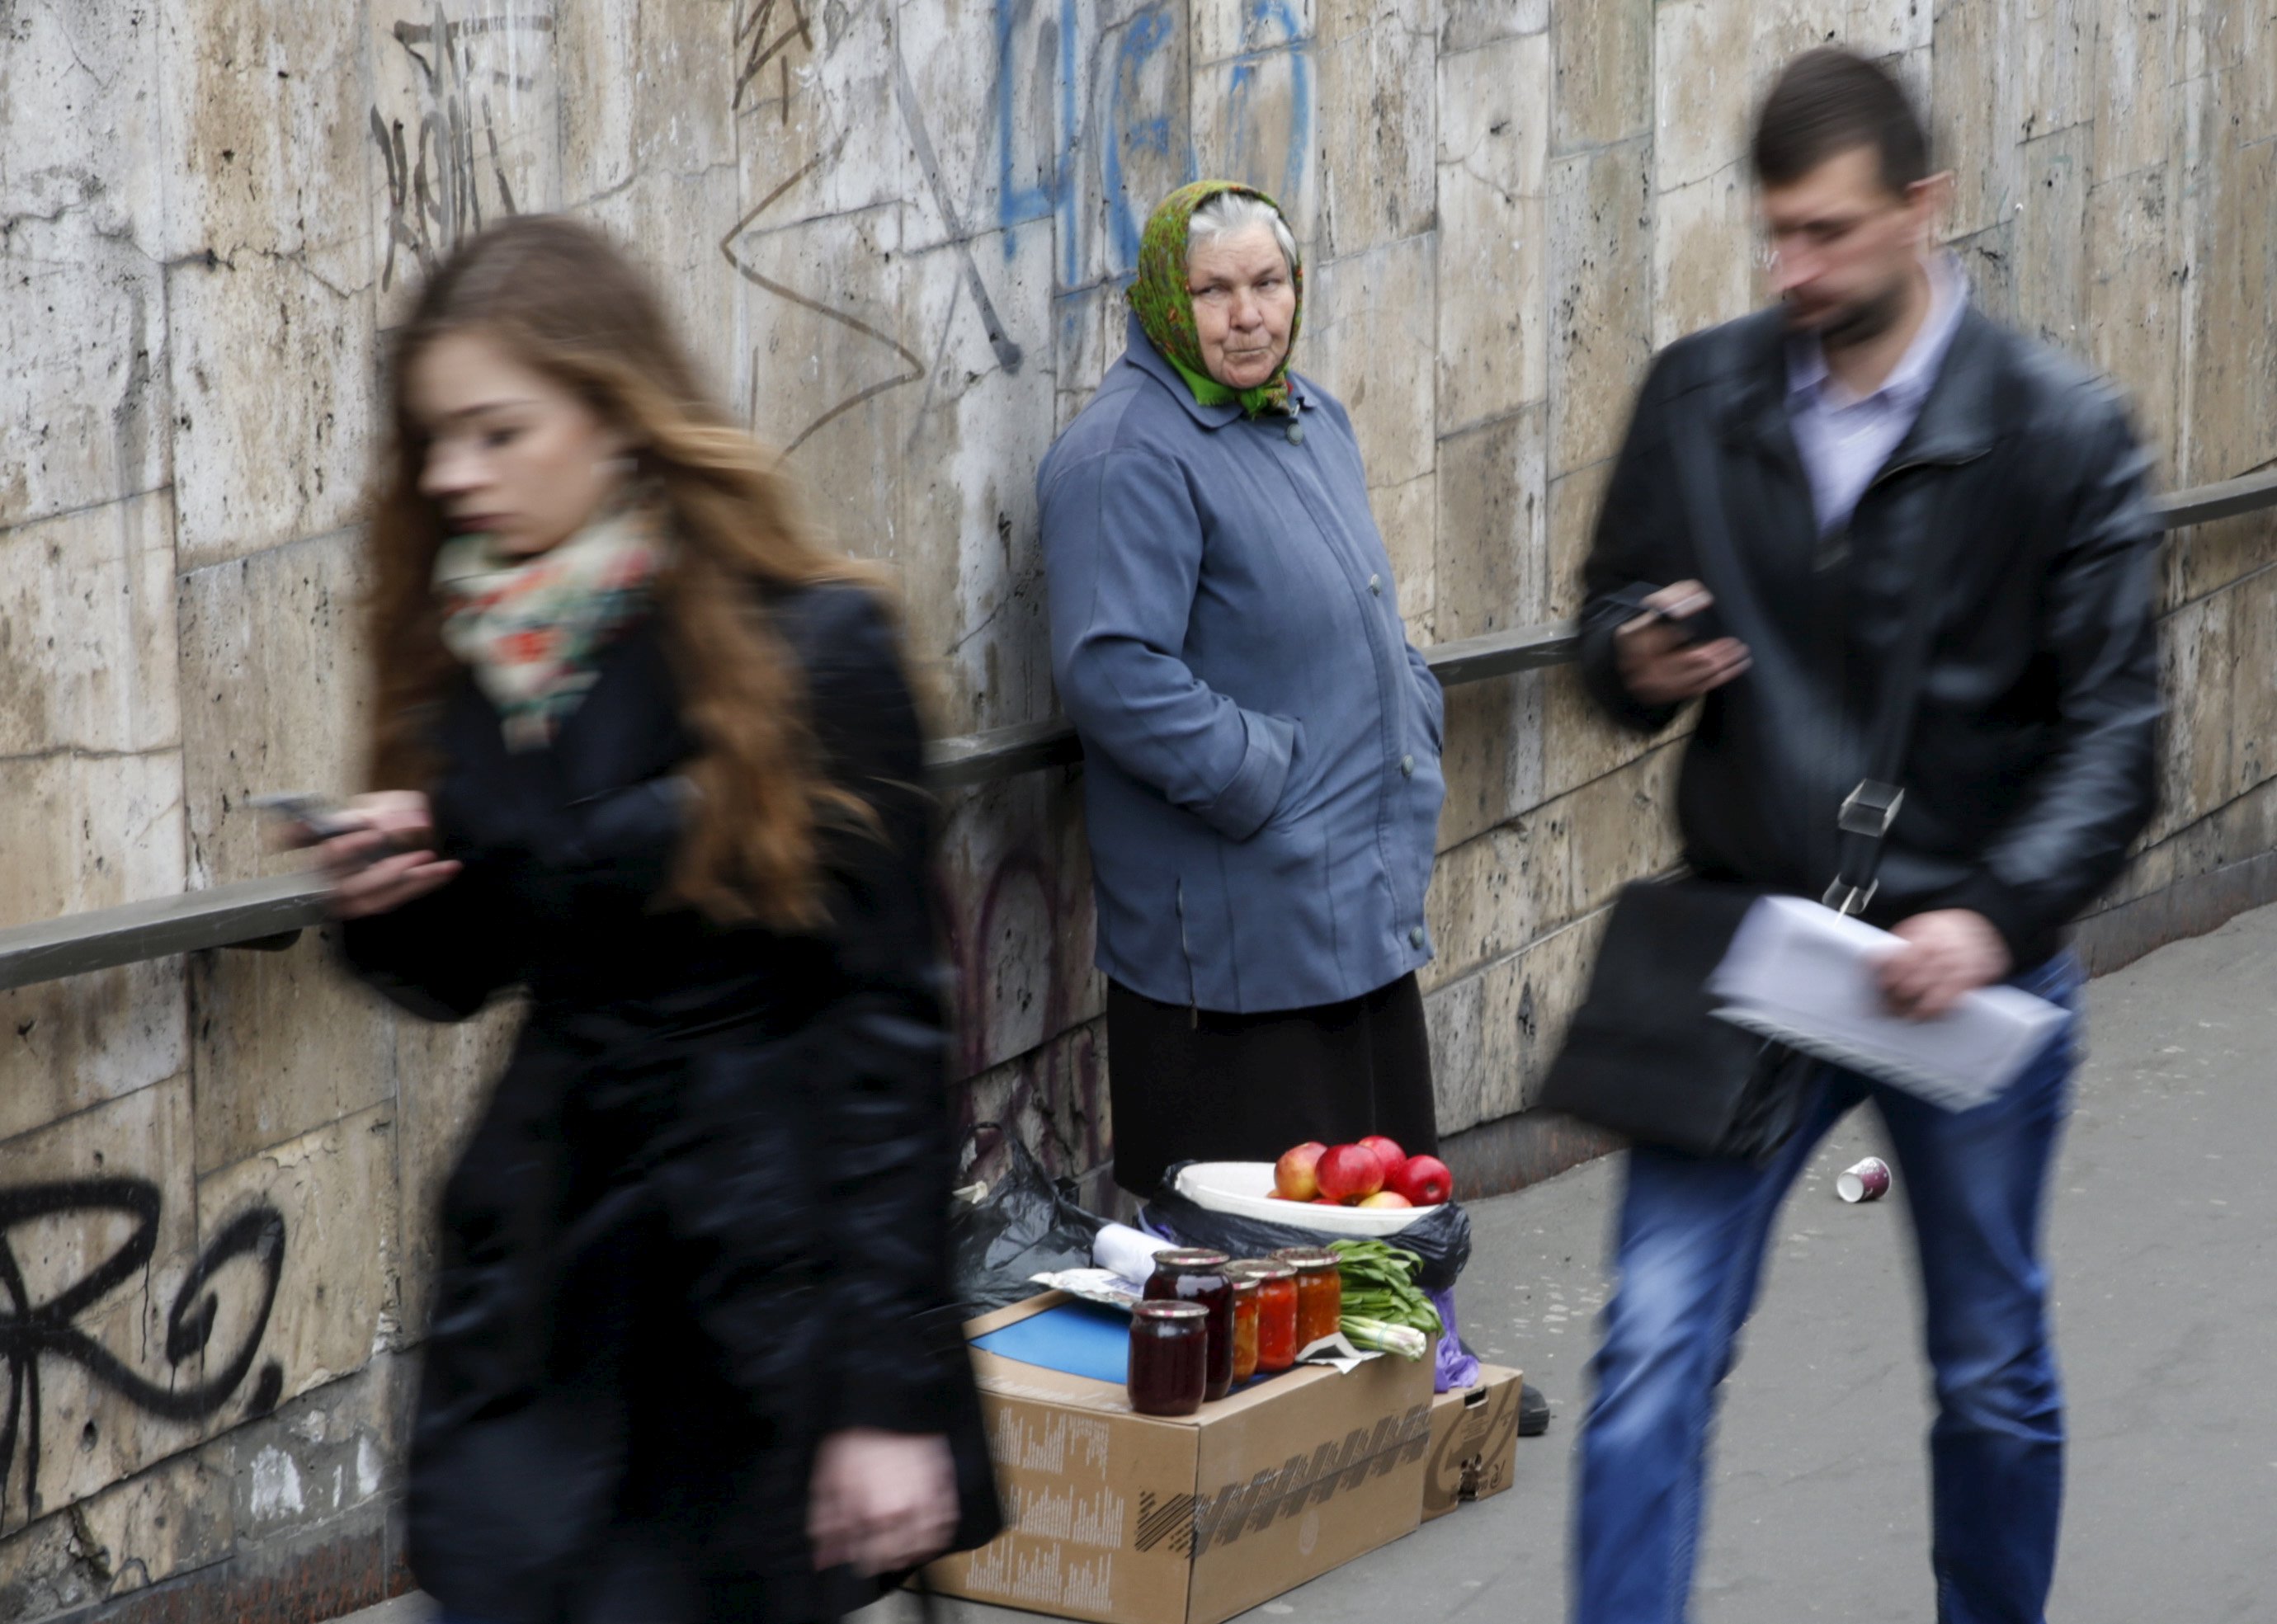 A vendor selling fruit and home-made food in Kiev. The economy in Ukraine is in deep crisis, and things are getting worse. Photo: Reuters